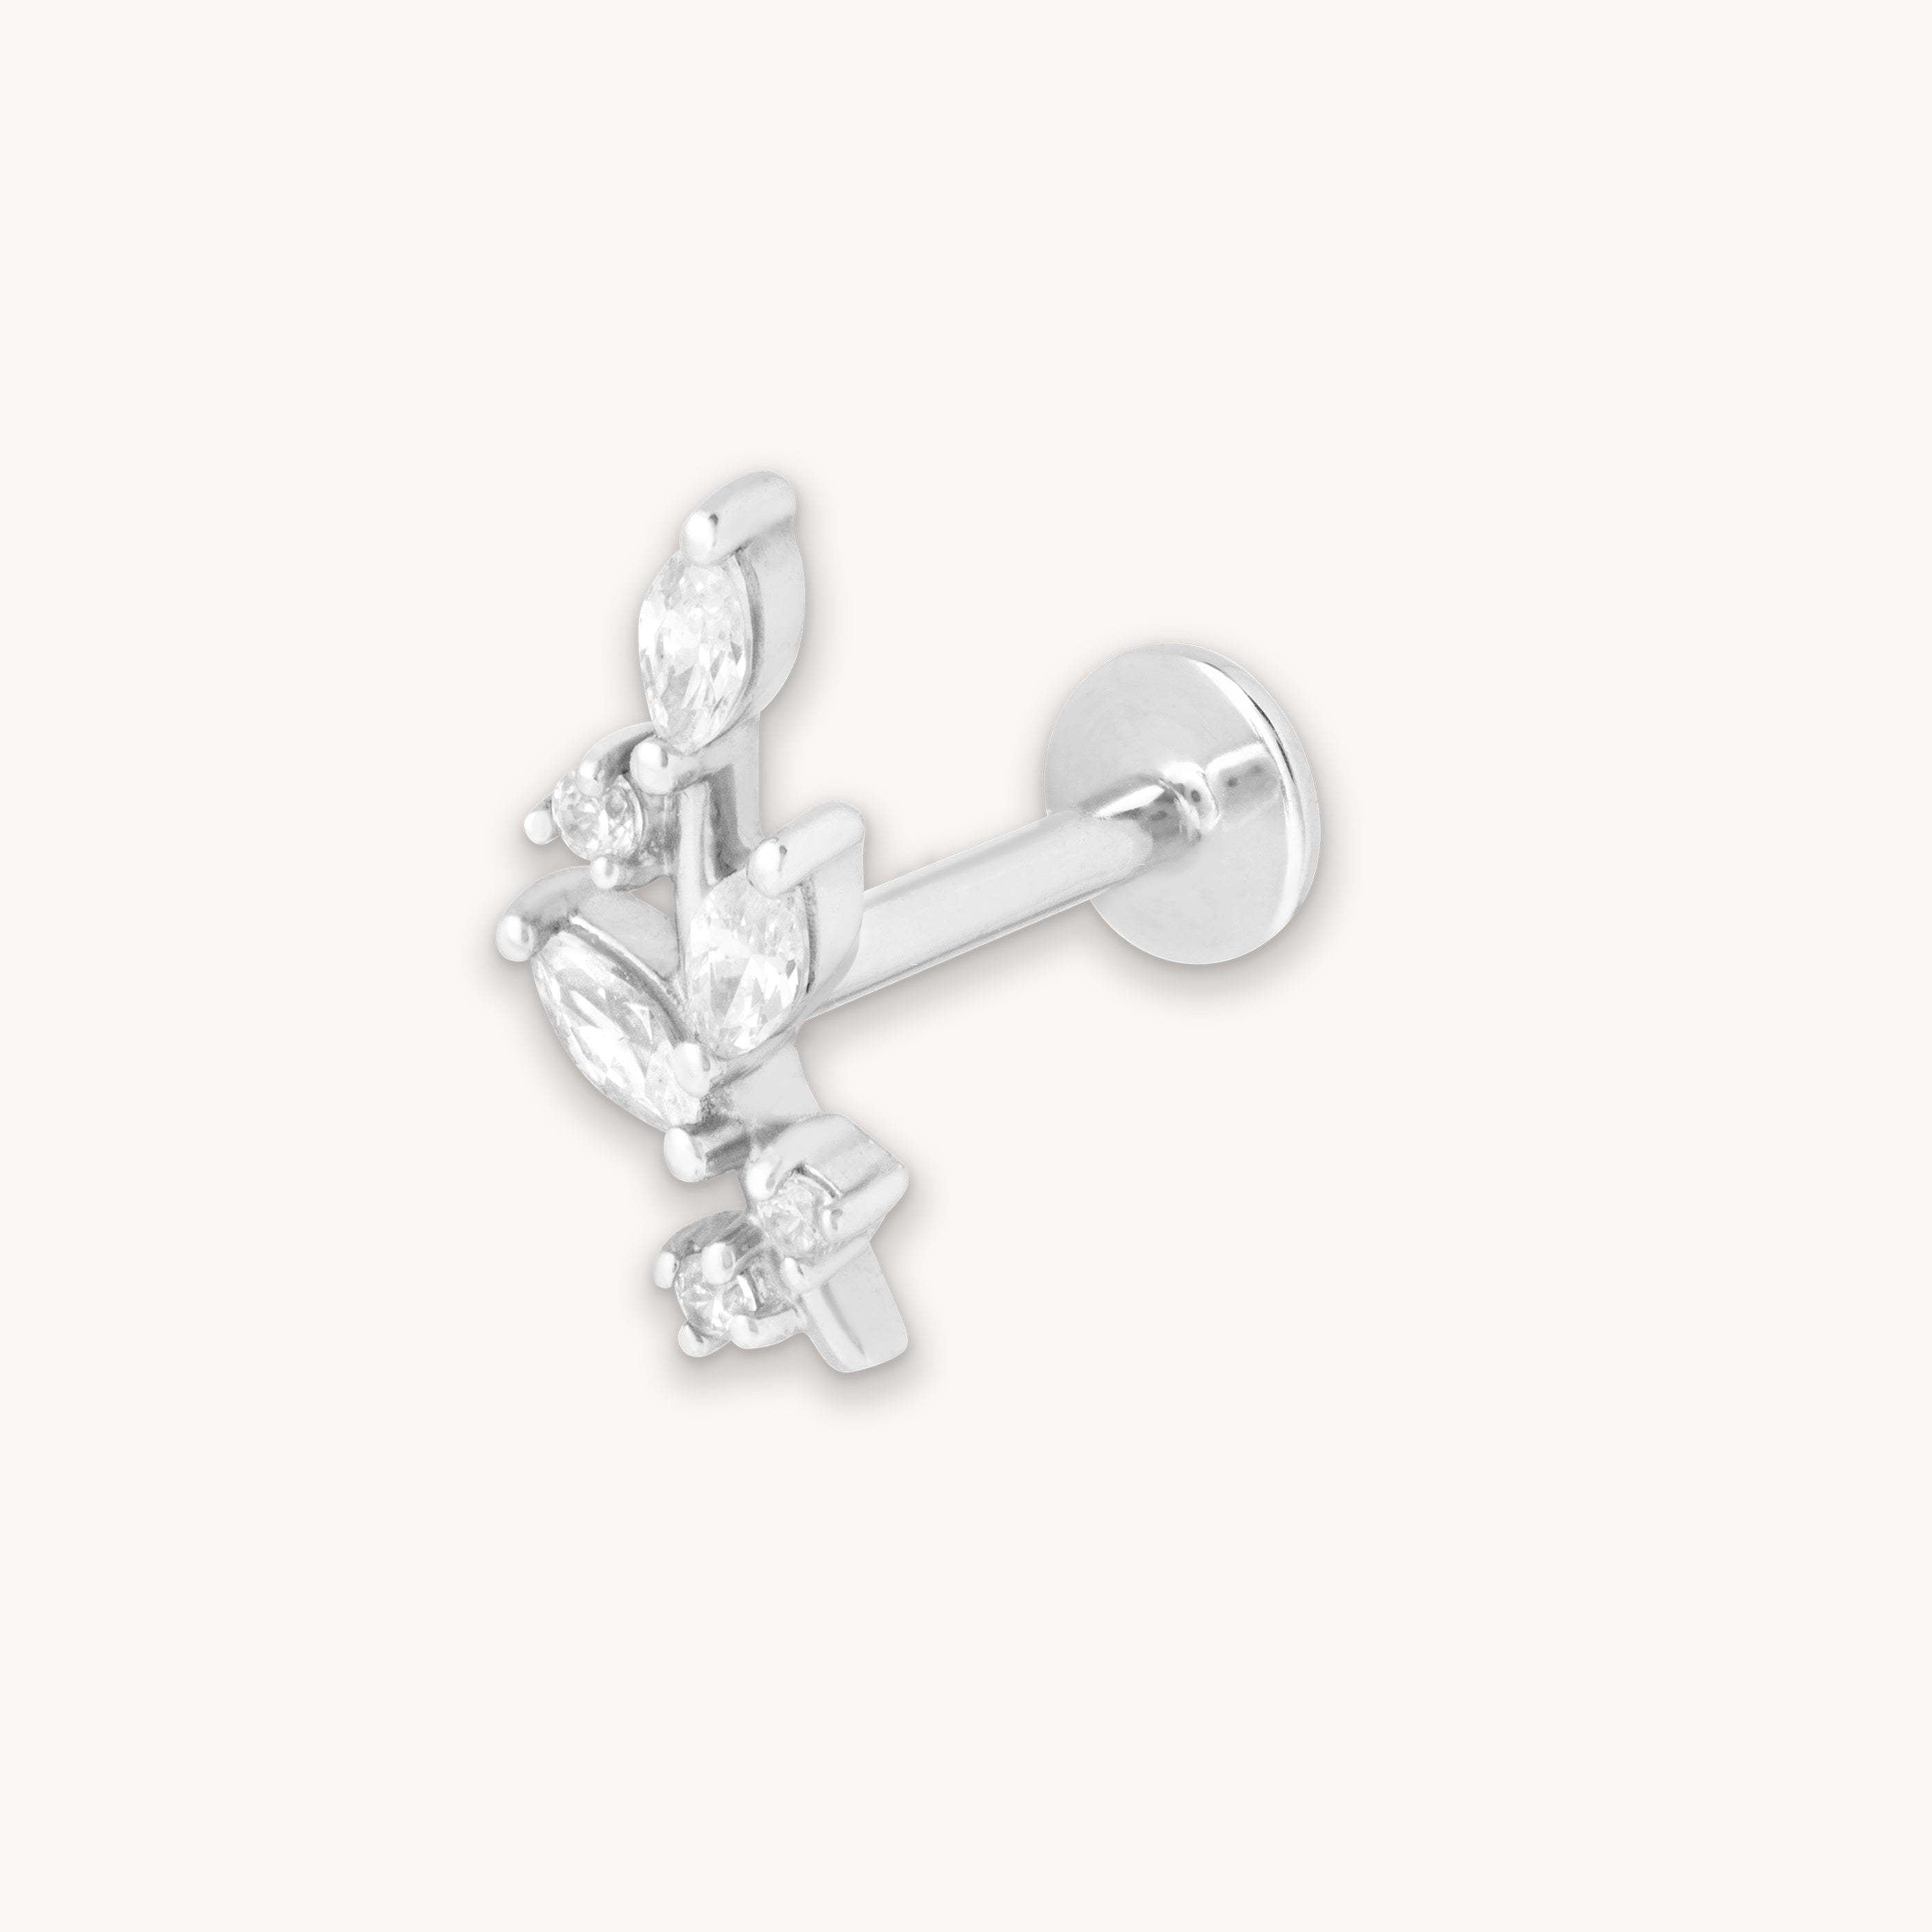 Botanical Piercing Stud 6mm in Solid White Gold